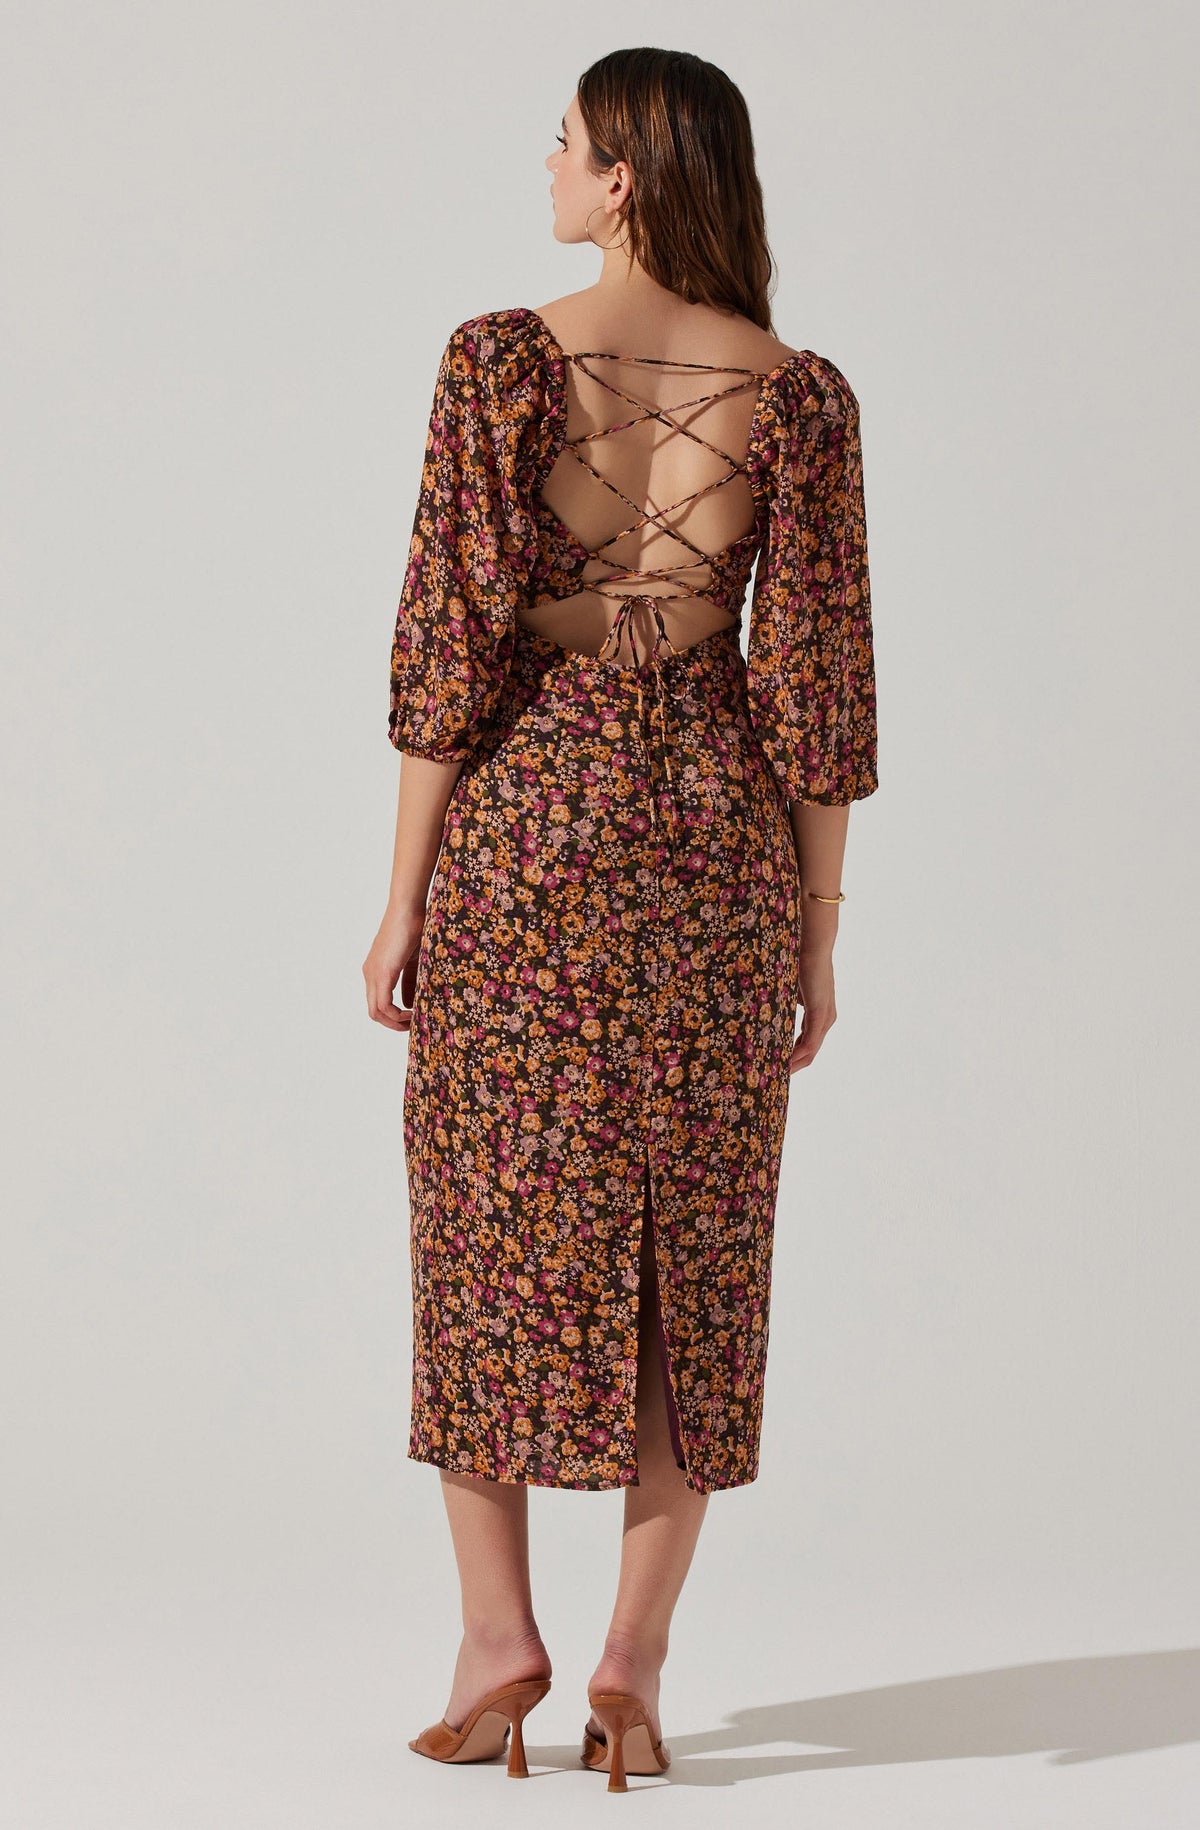 For Daytime Wear: Topshop Tall Printed Floral Midi Dress